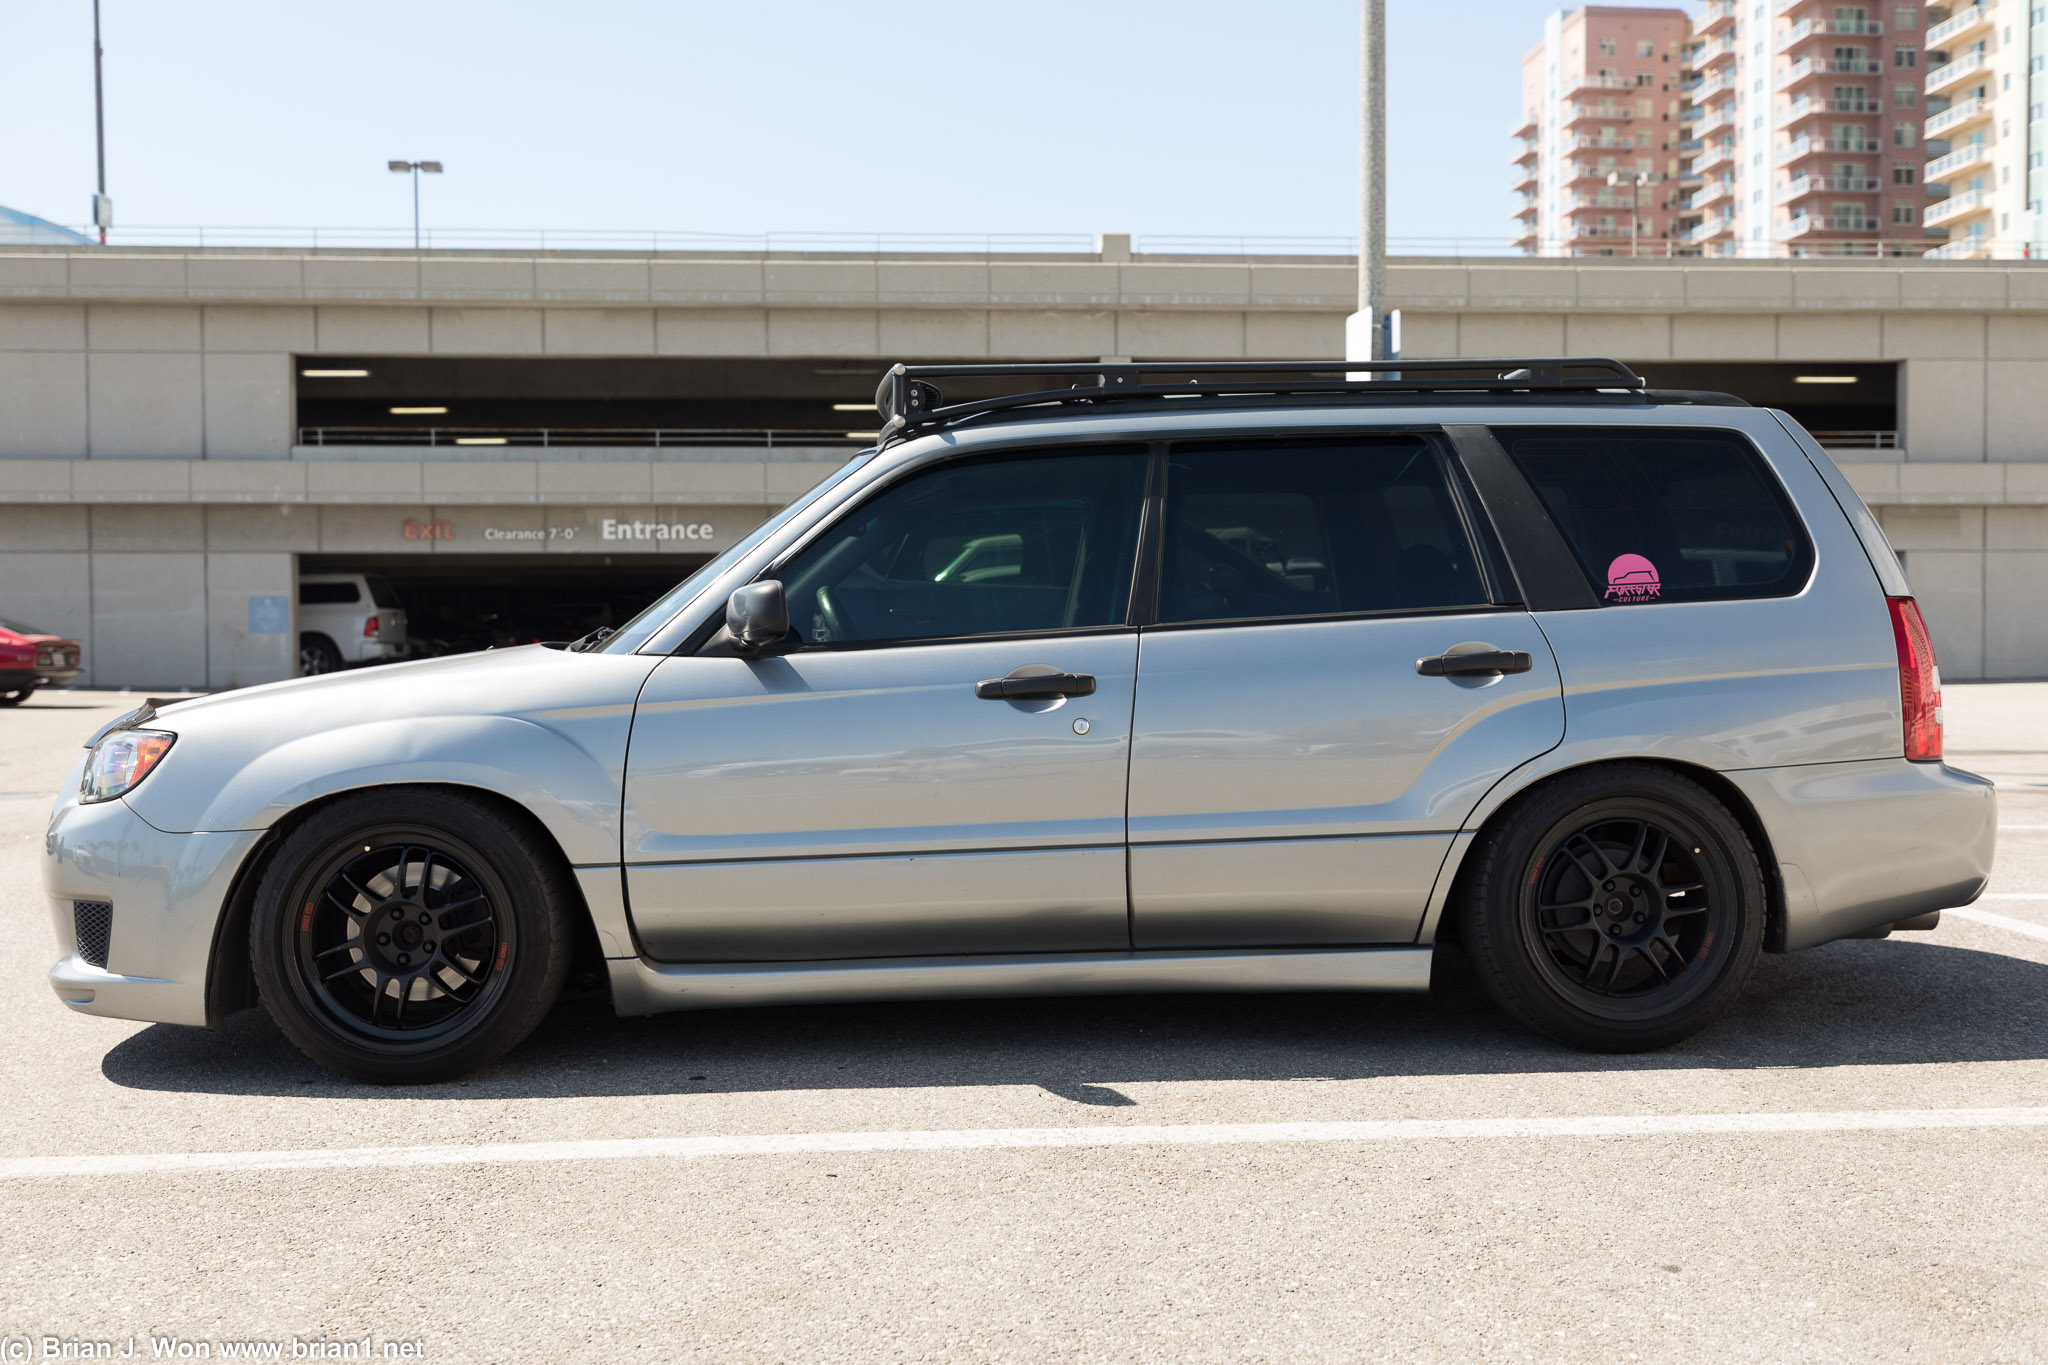 Another rare beast, a modified Subaru Forester. Rear drums and no hood scoop = NA. Boo.